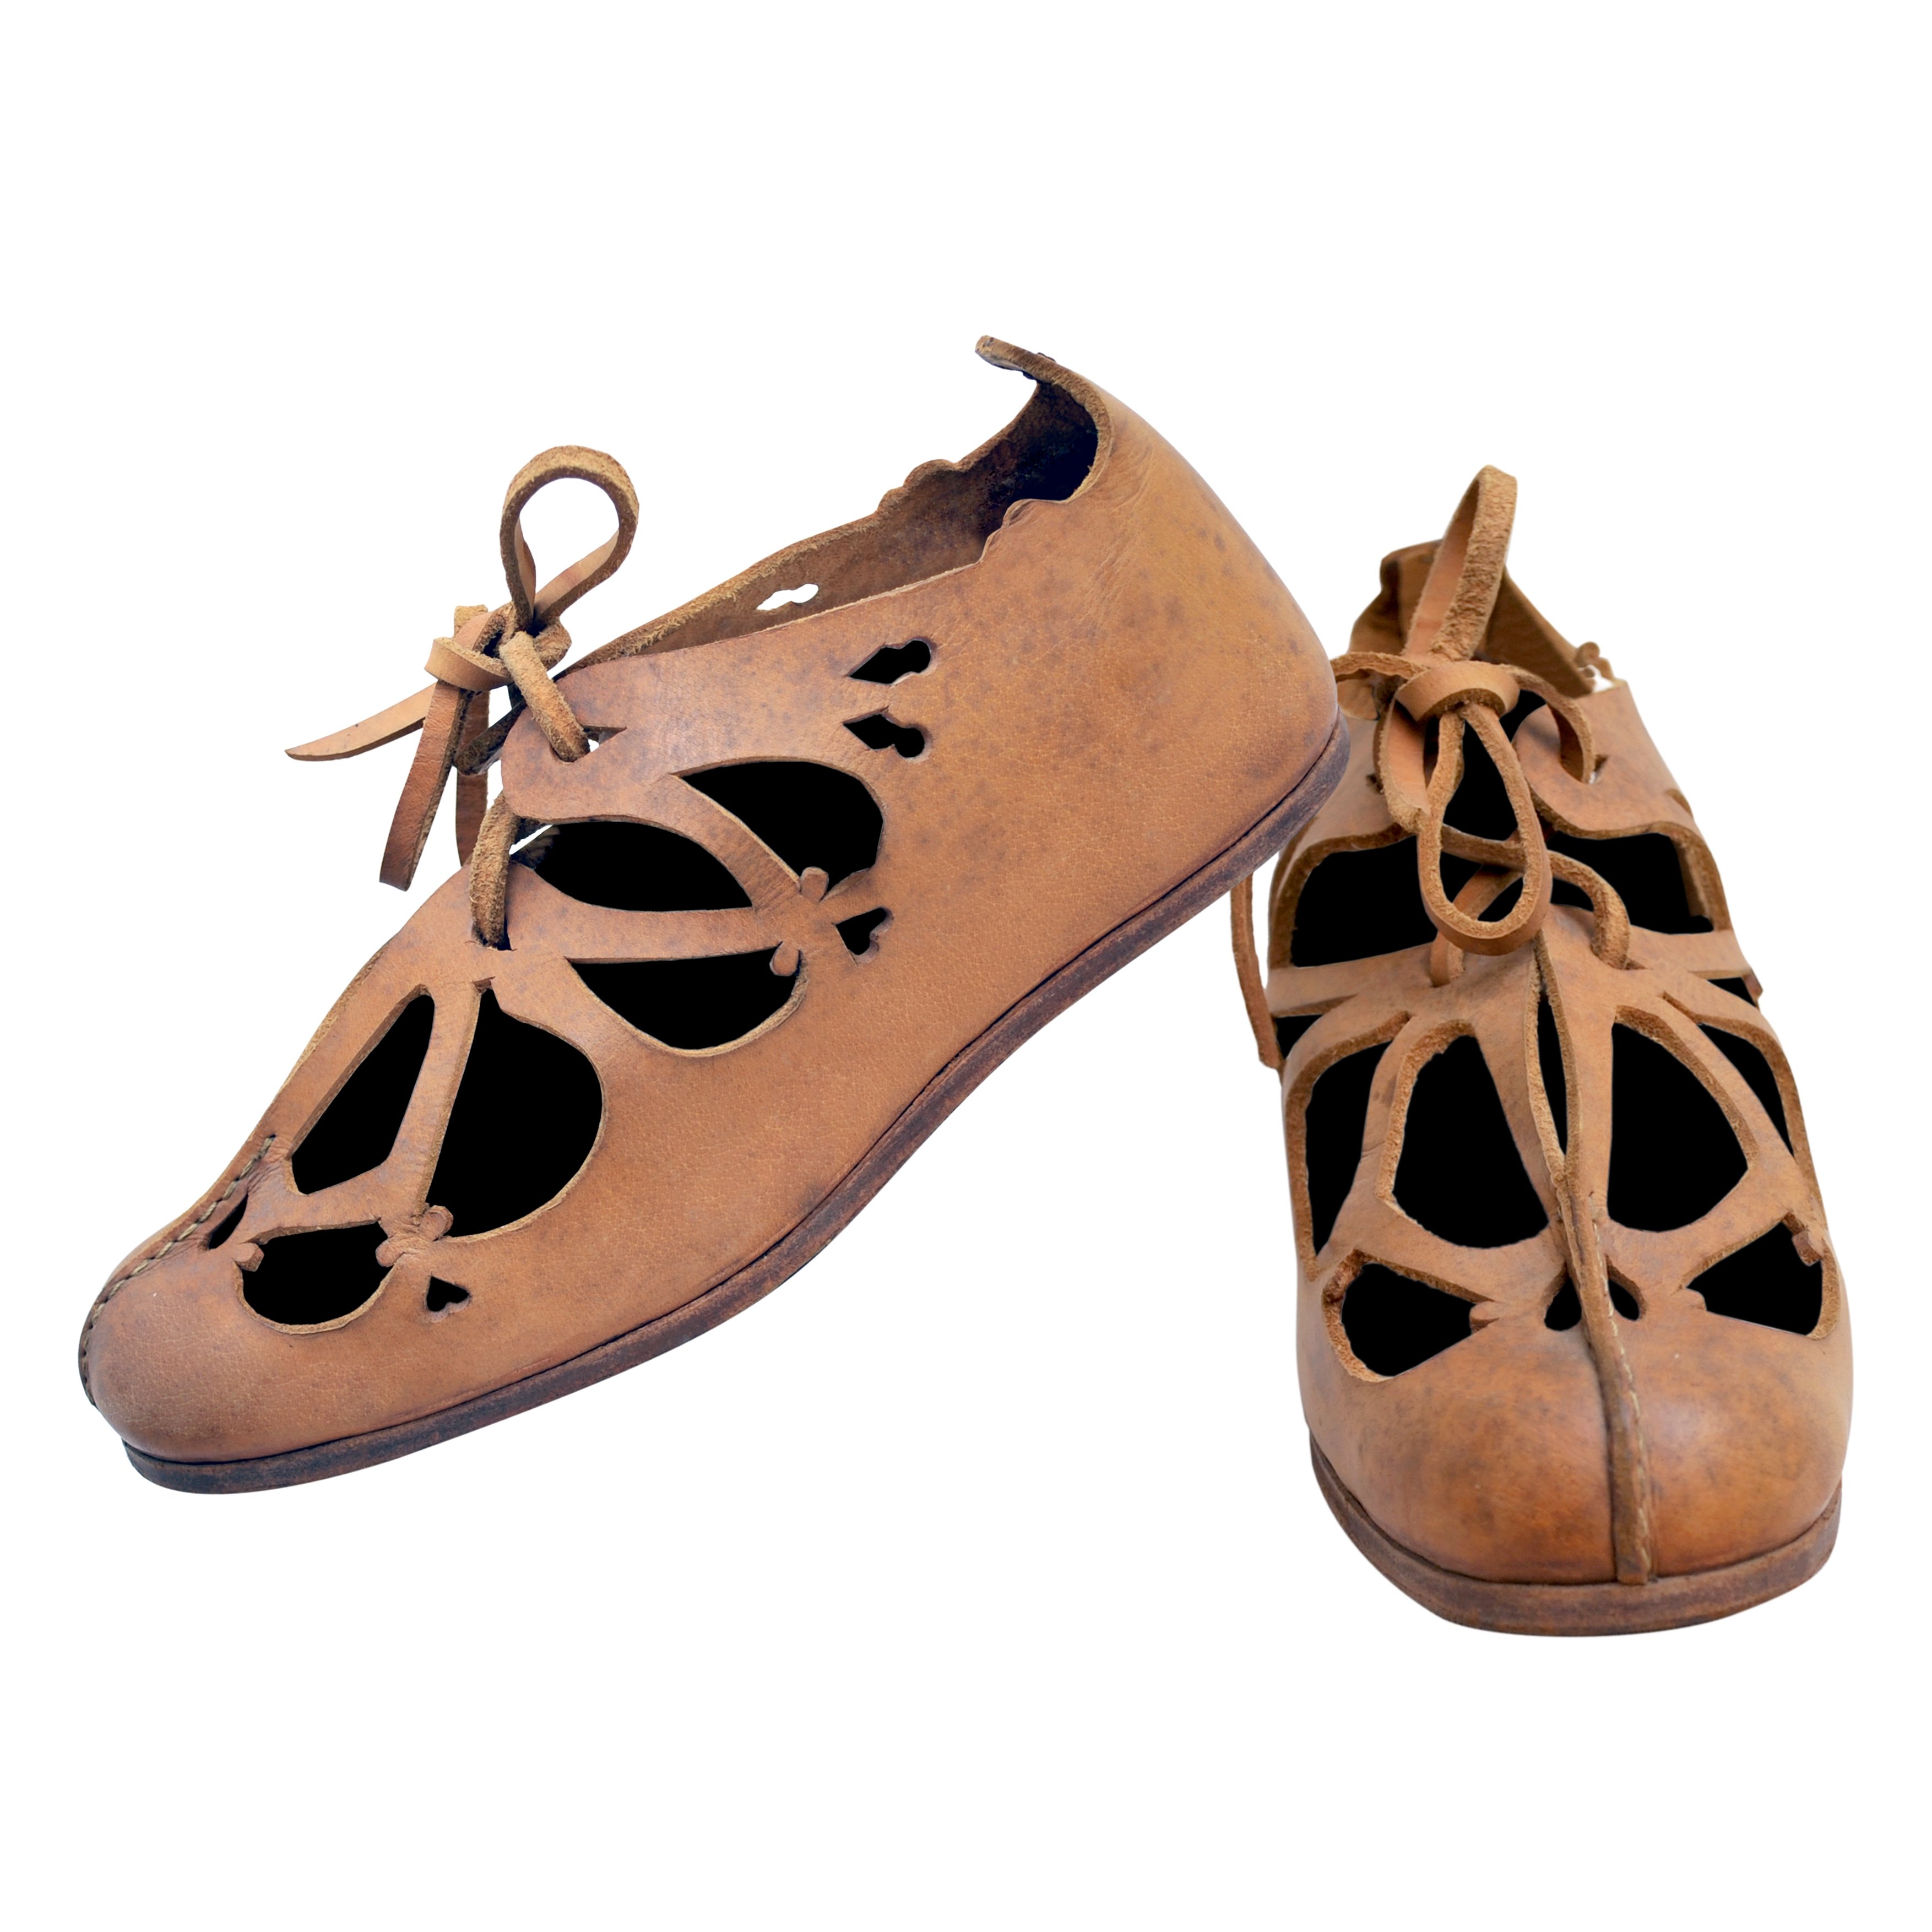 Roman shoes of the Bar Hill type with Hobils, Size 11